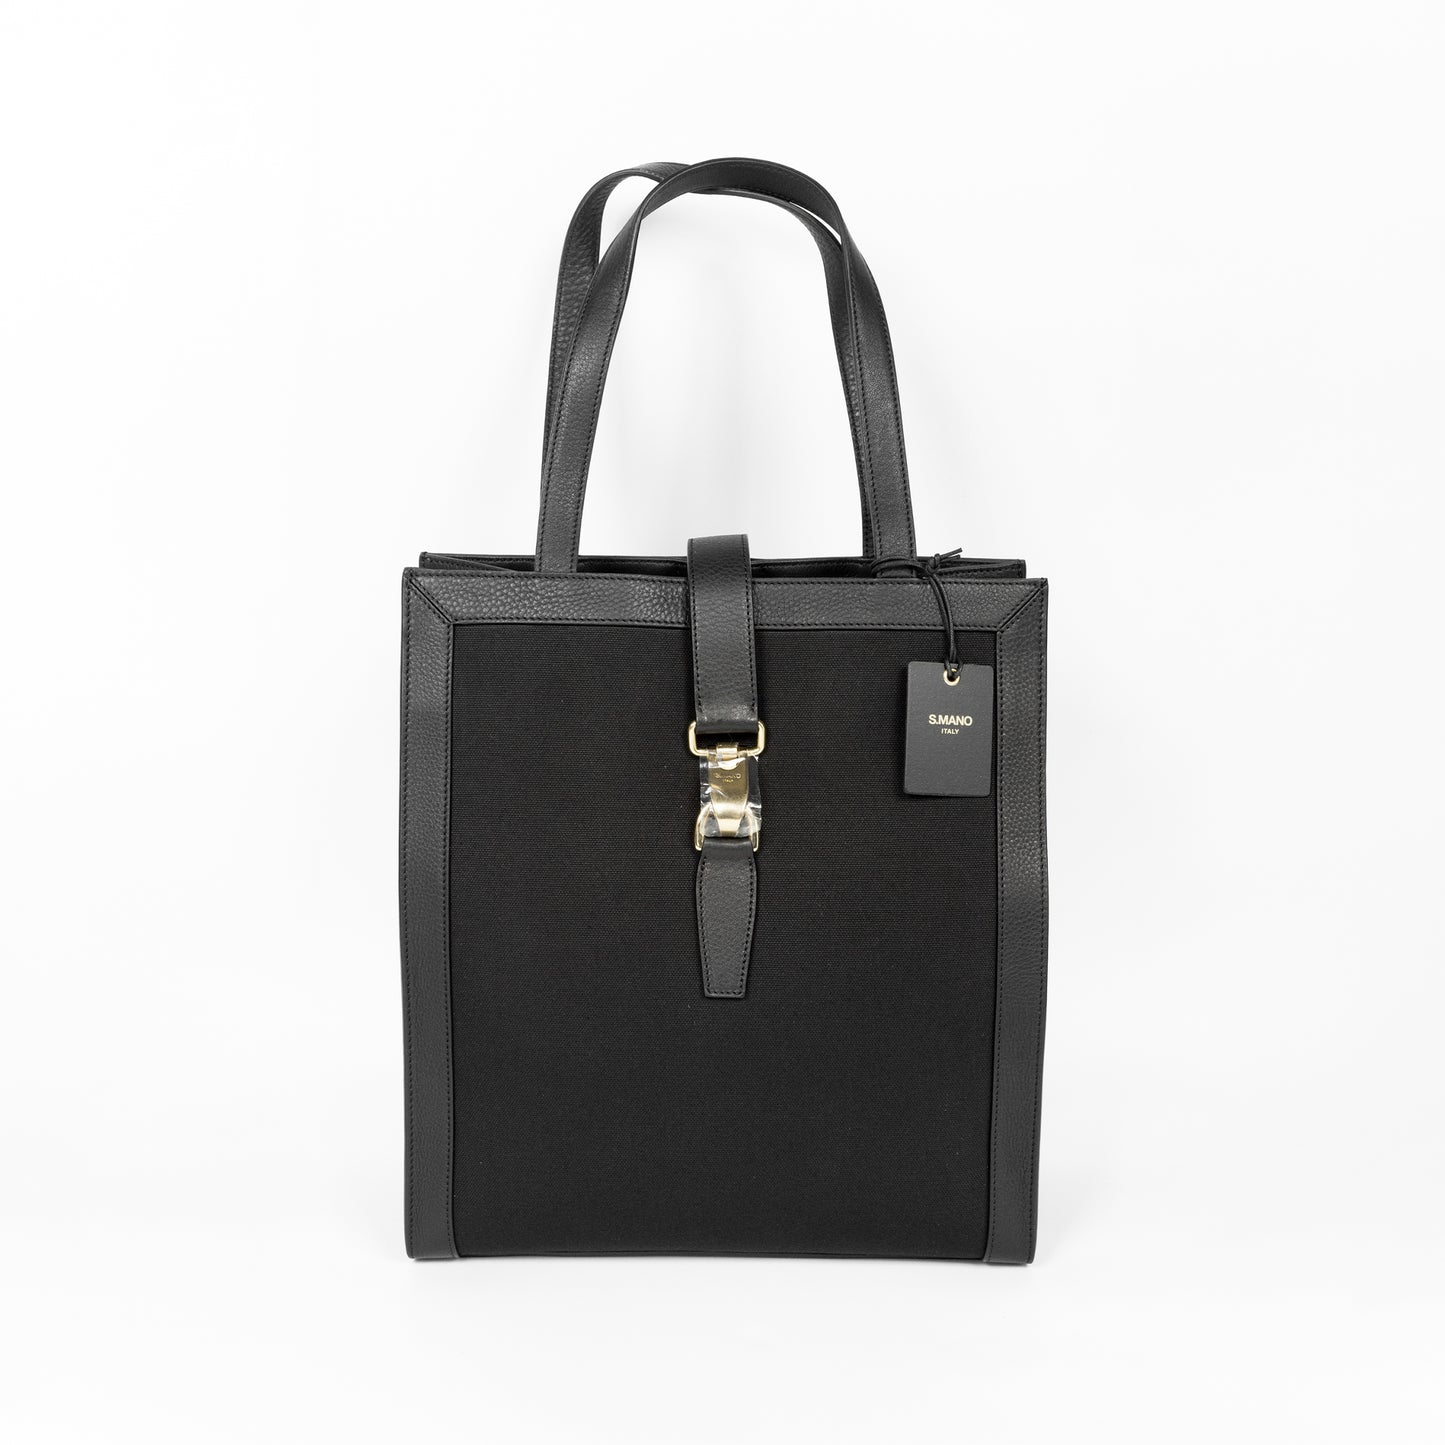 S.MANO VERTICAL TOTE